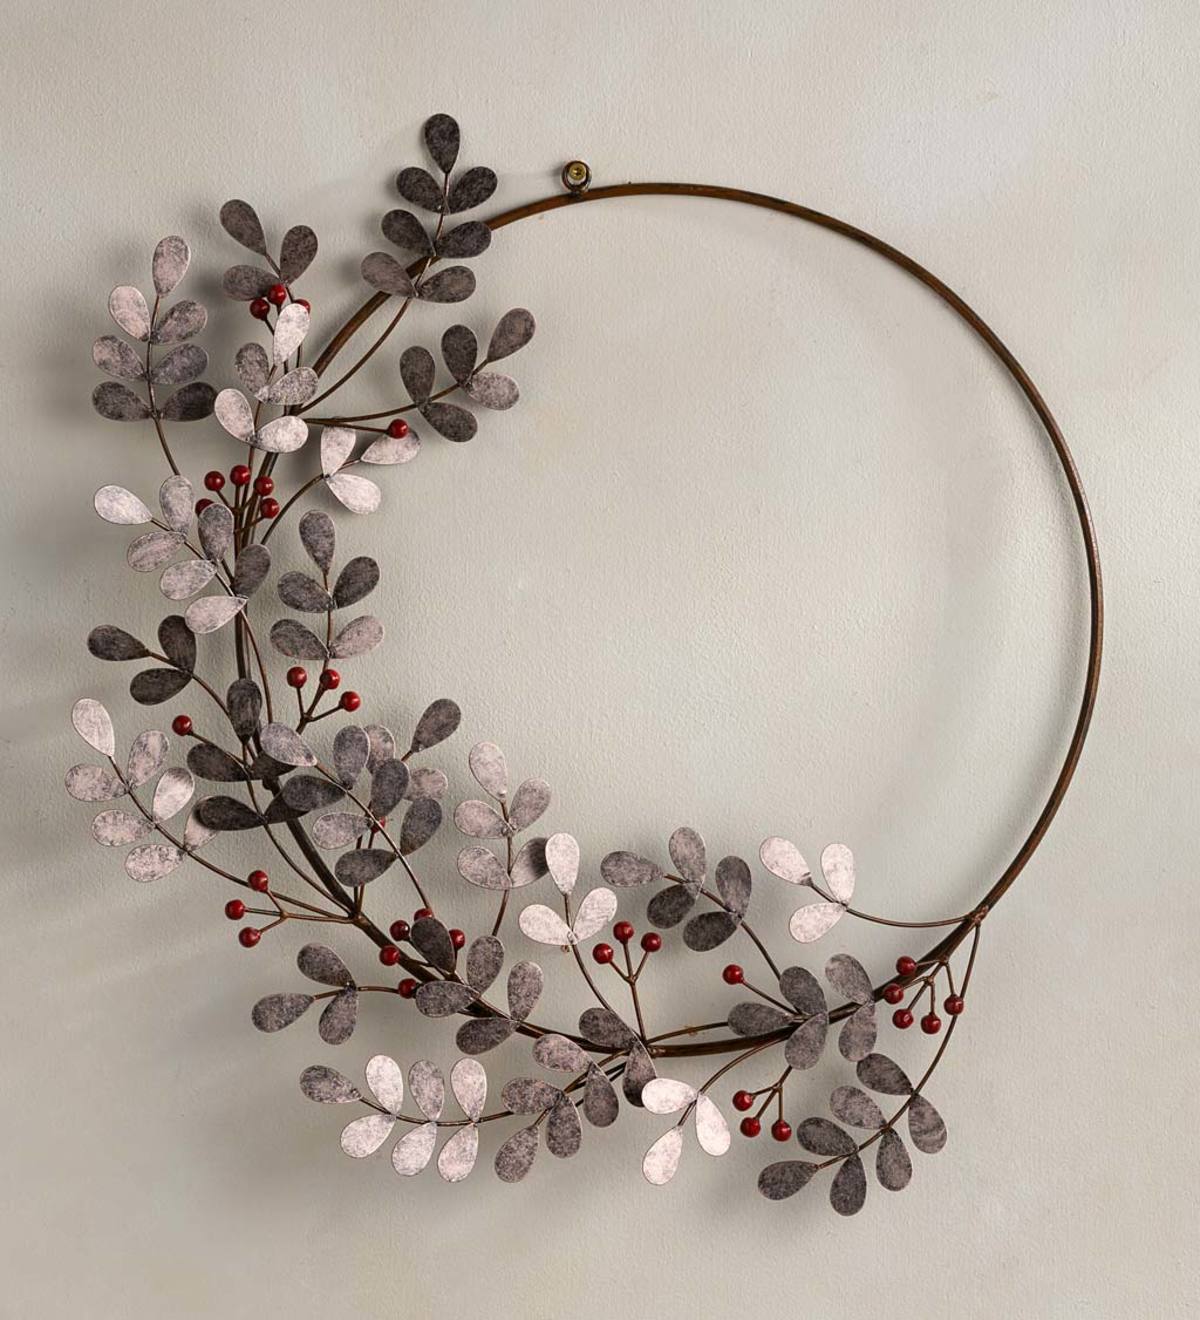 Recycled Metal Olive Leaf and Berry Wreath